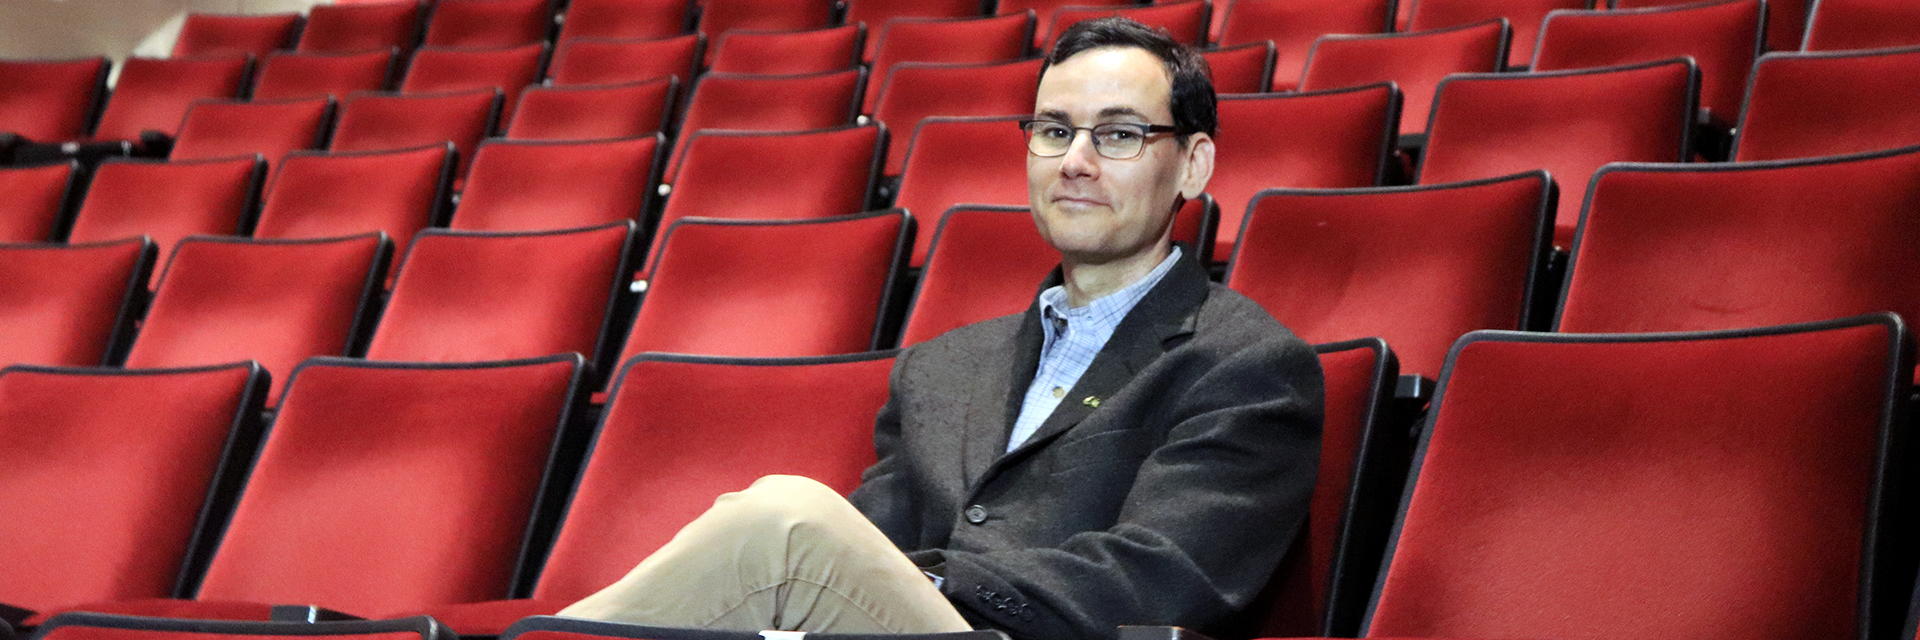 Jason Freeman, Chair of the School of Music, seated at the Ferst Center for the Arts.